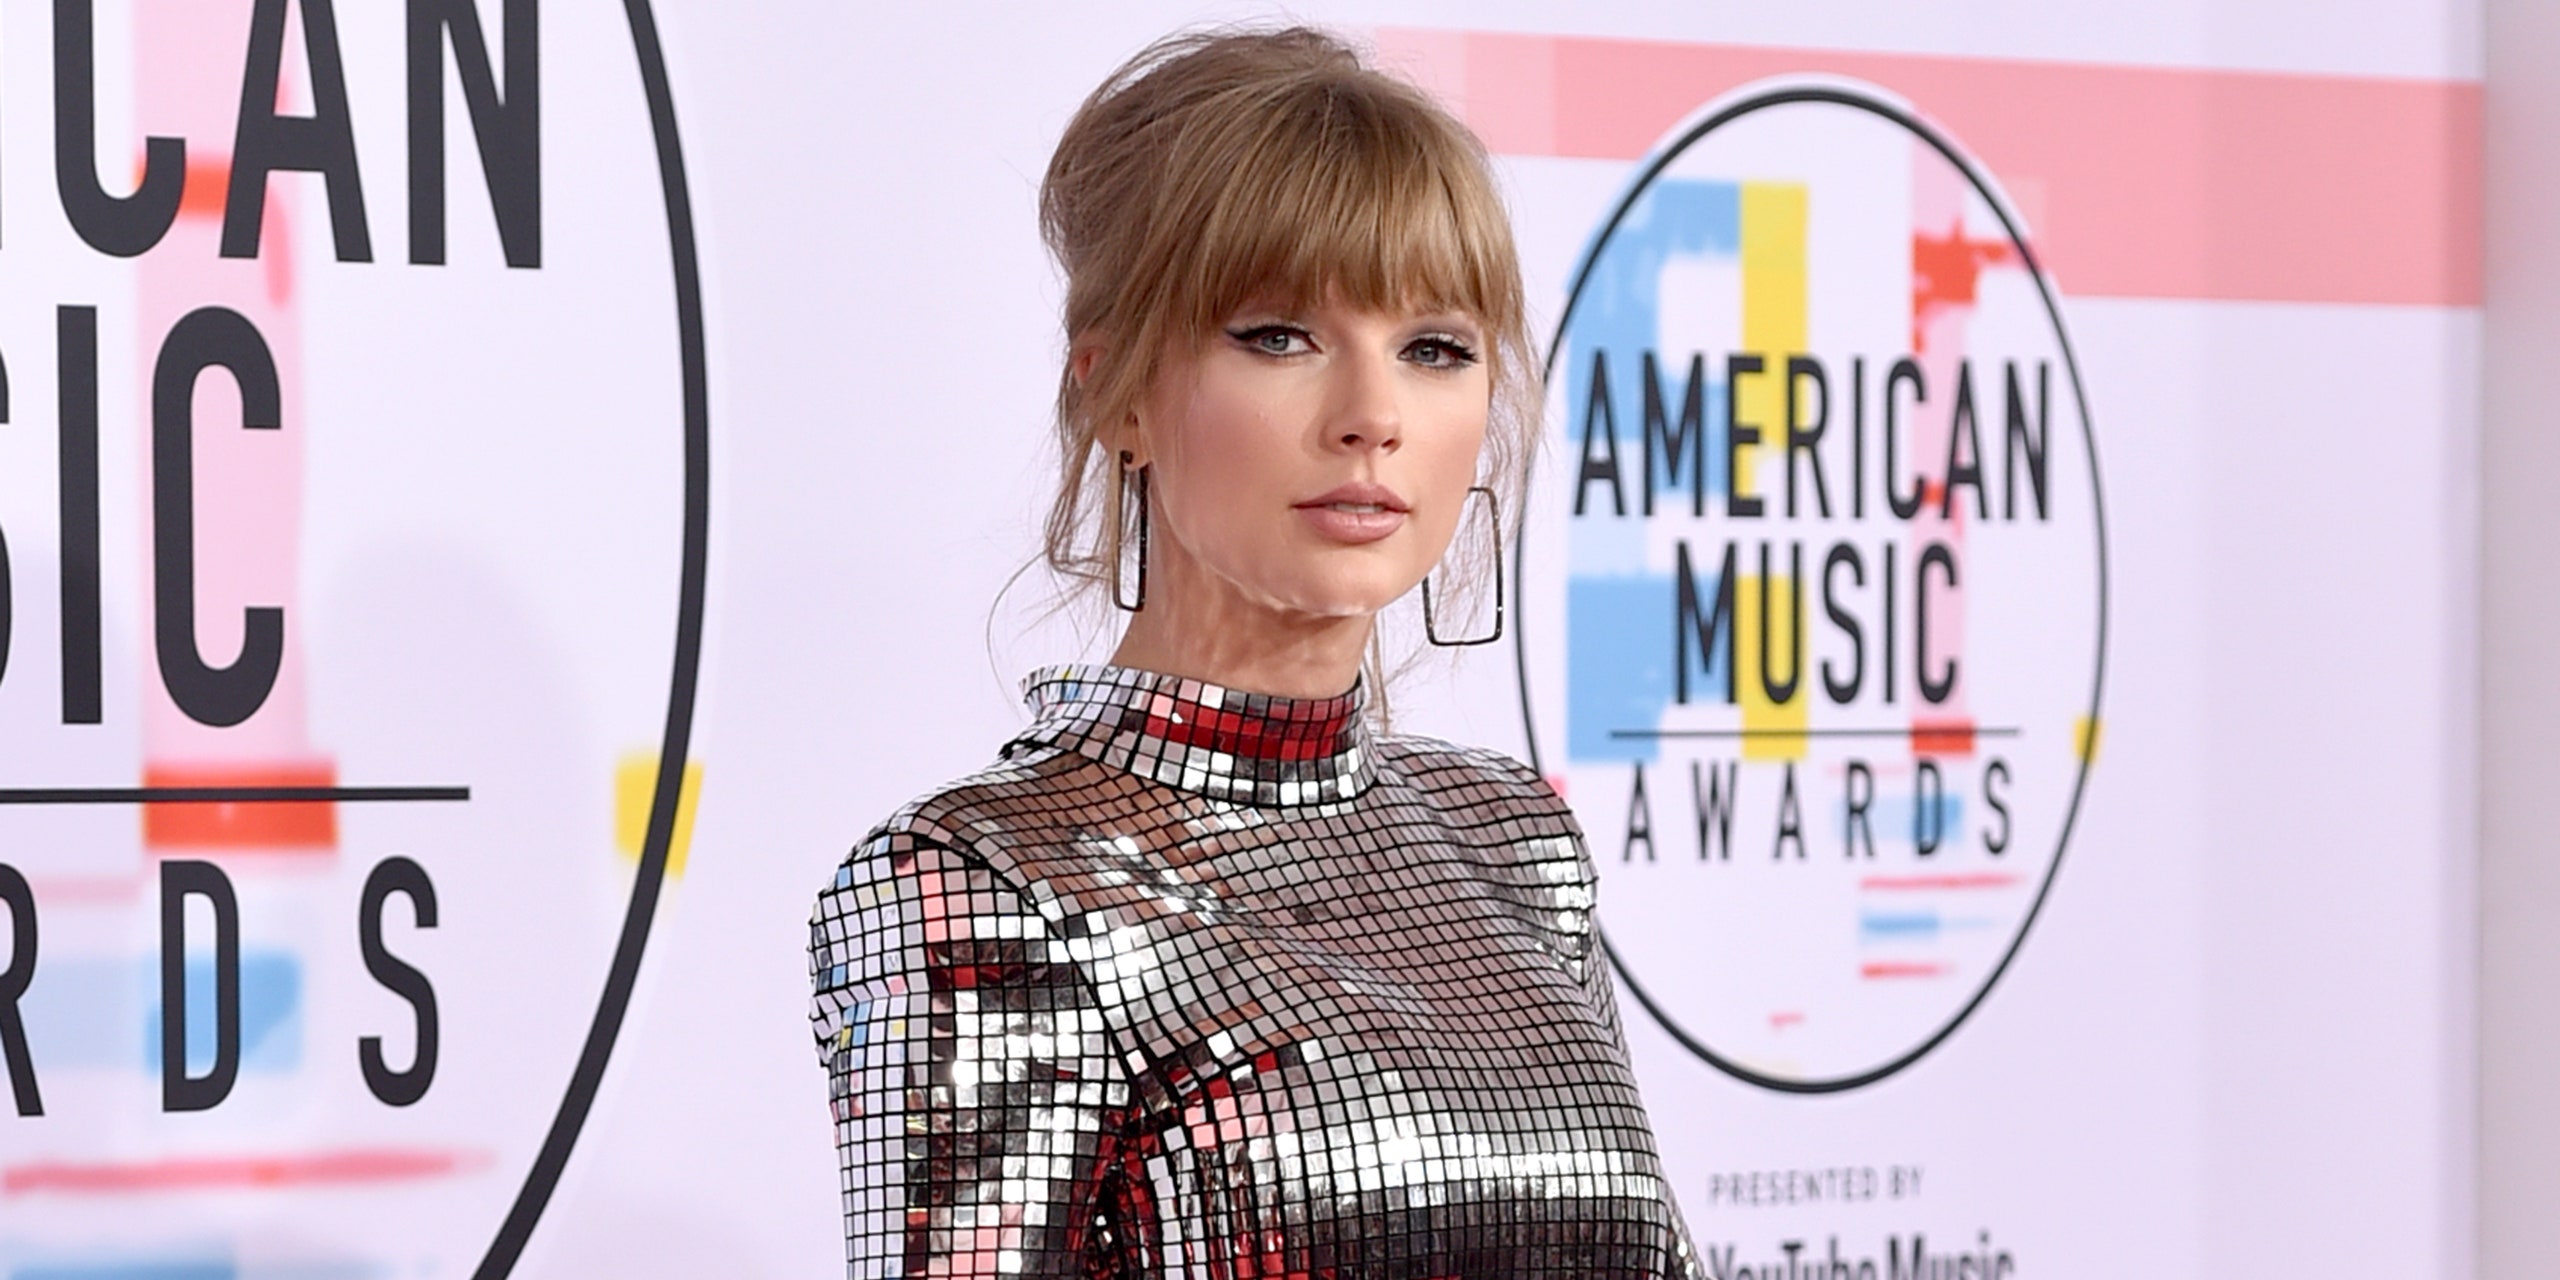 https://pitchfork.com/news/taylor-swift-allowed-to-play-old-songs-at-2019-american-music-awards-ex-label-claims/